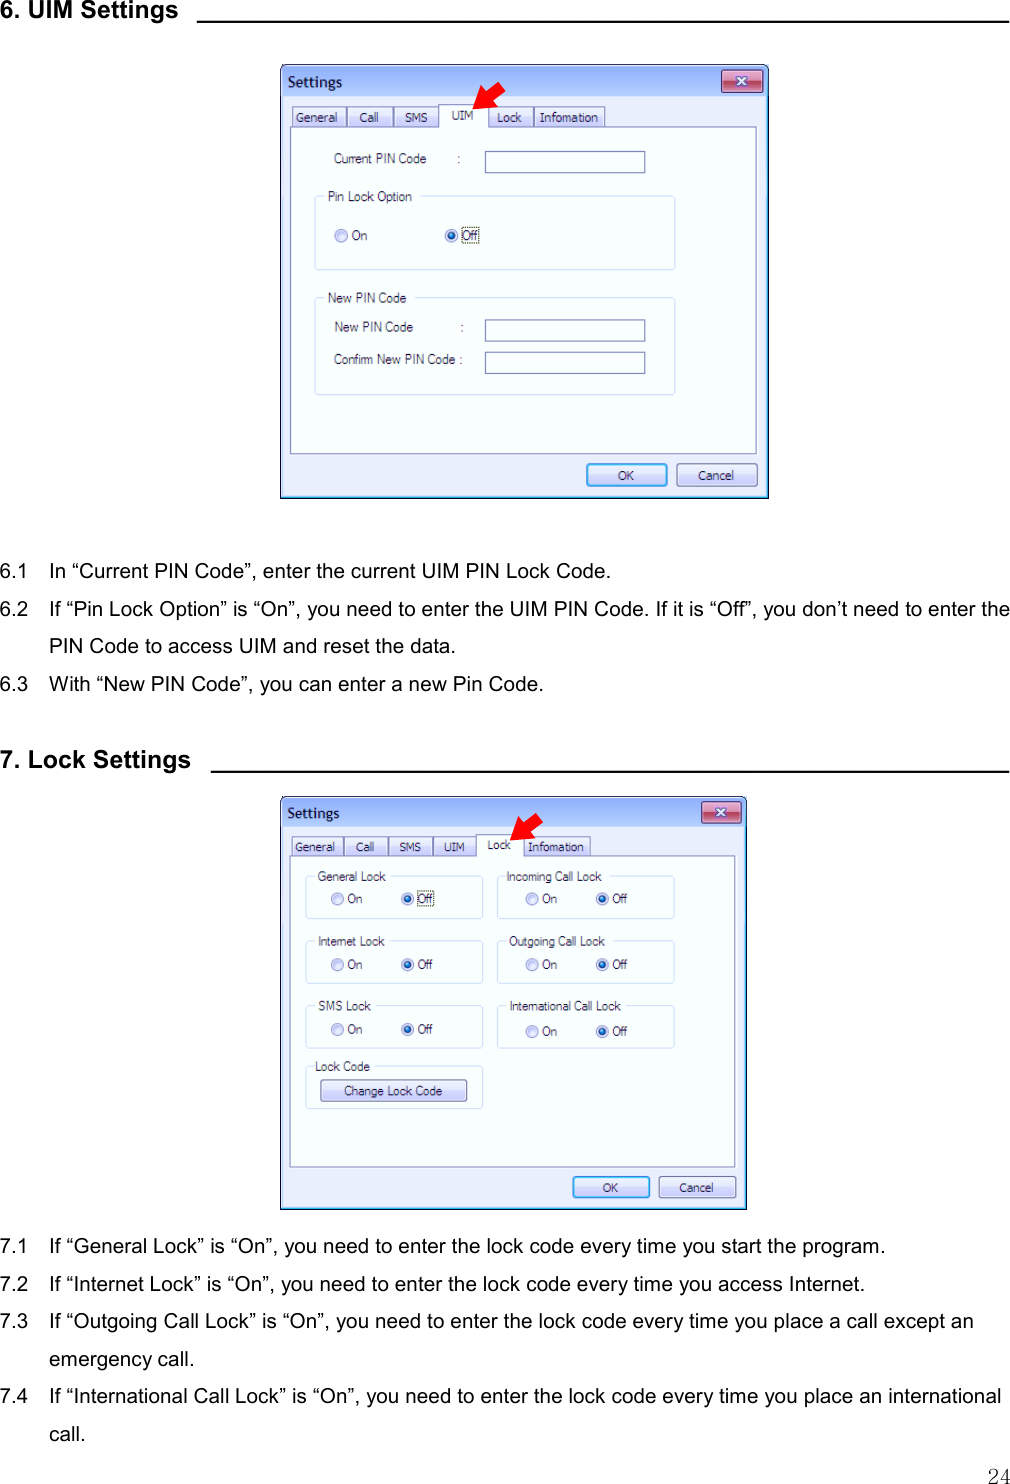   24  6. UIM Settings  __________________________________________________________                6.1    In “Current PIN Code”, enter the current UIM PIN Lock Code. 6.2    If “Pin Lock Option” is “On”, you need to enter the UIM PIN Code. If it is “Off”, you don’t need to enter the PIN Code to access UIM and reset the data. 6.3    With “New PIN Code”, you can enter a new Pin Code.  7. Lock Settings  _________________________________________________________              7.1    If “General Lock” is “On”, you need to enter the lock code every time you start the program. 7.2   If “Internet Lock” is “On”, you need to enter the lock code every time you access Internet. 7.3    If “Outgoing Call Lock” is “On”, you need to enter the lock code every time you place a call except an emergency call. 7.4    If “International Call Lock” is “On”, you need to enter the lock code every time you place an international call. 